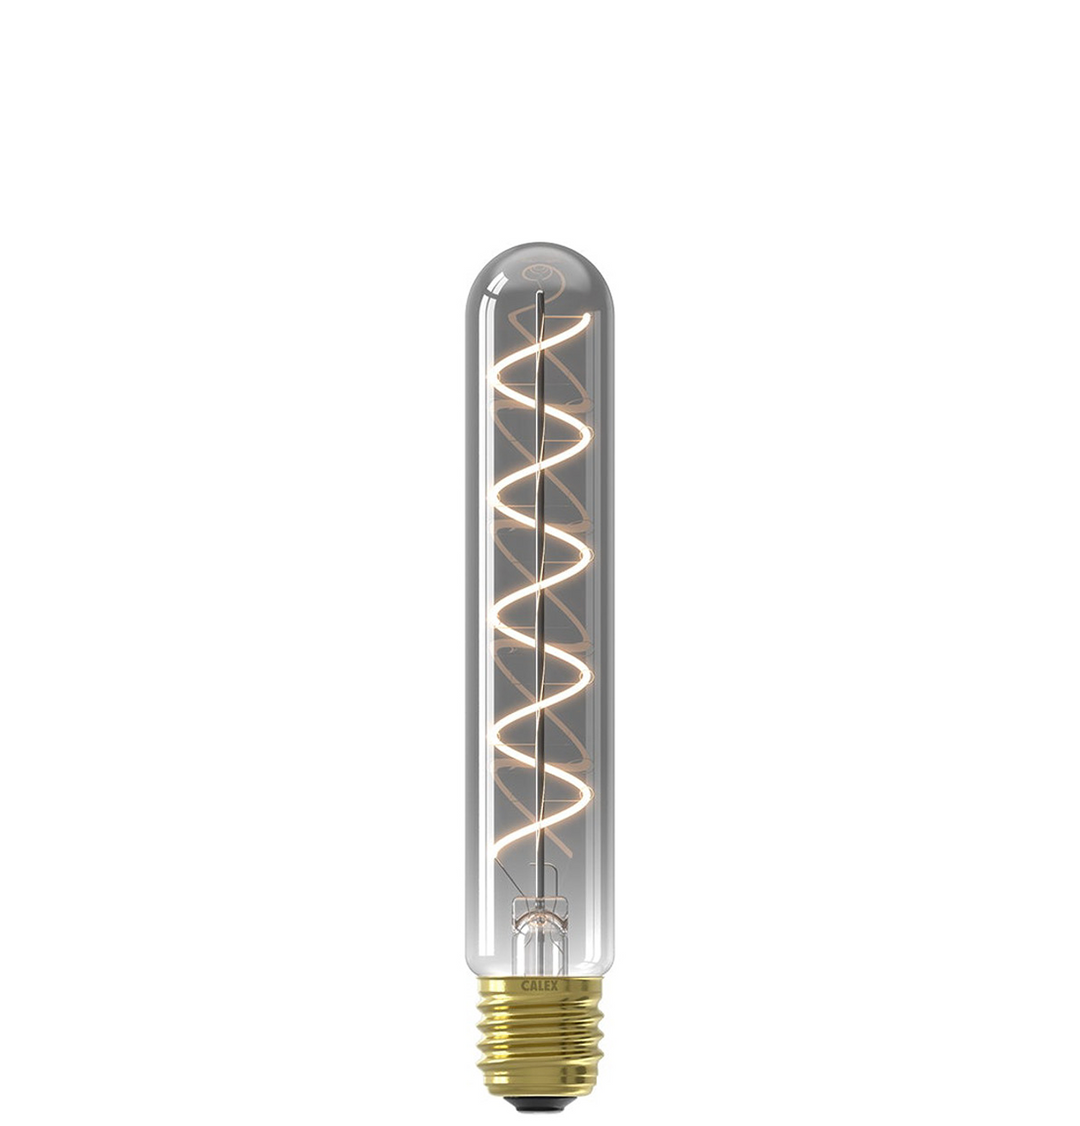 Calex Tube T32x185 Titanium Flex Filament, E27, Dimmable with LED Dimmer